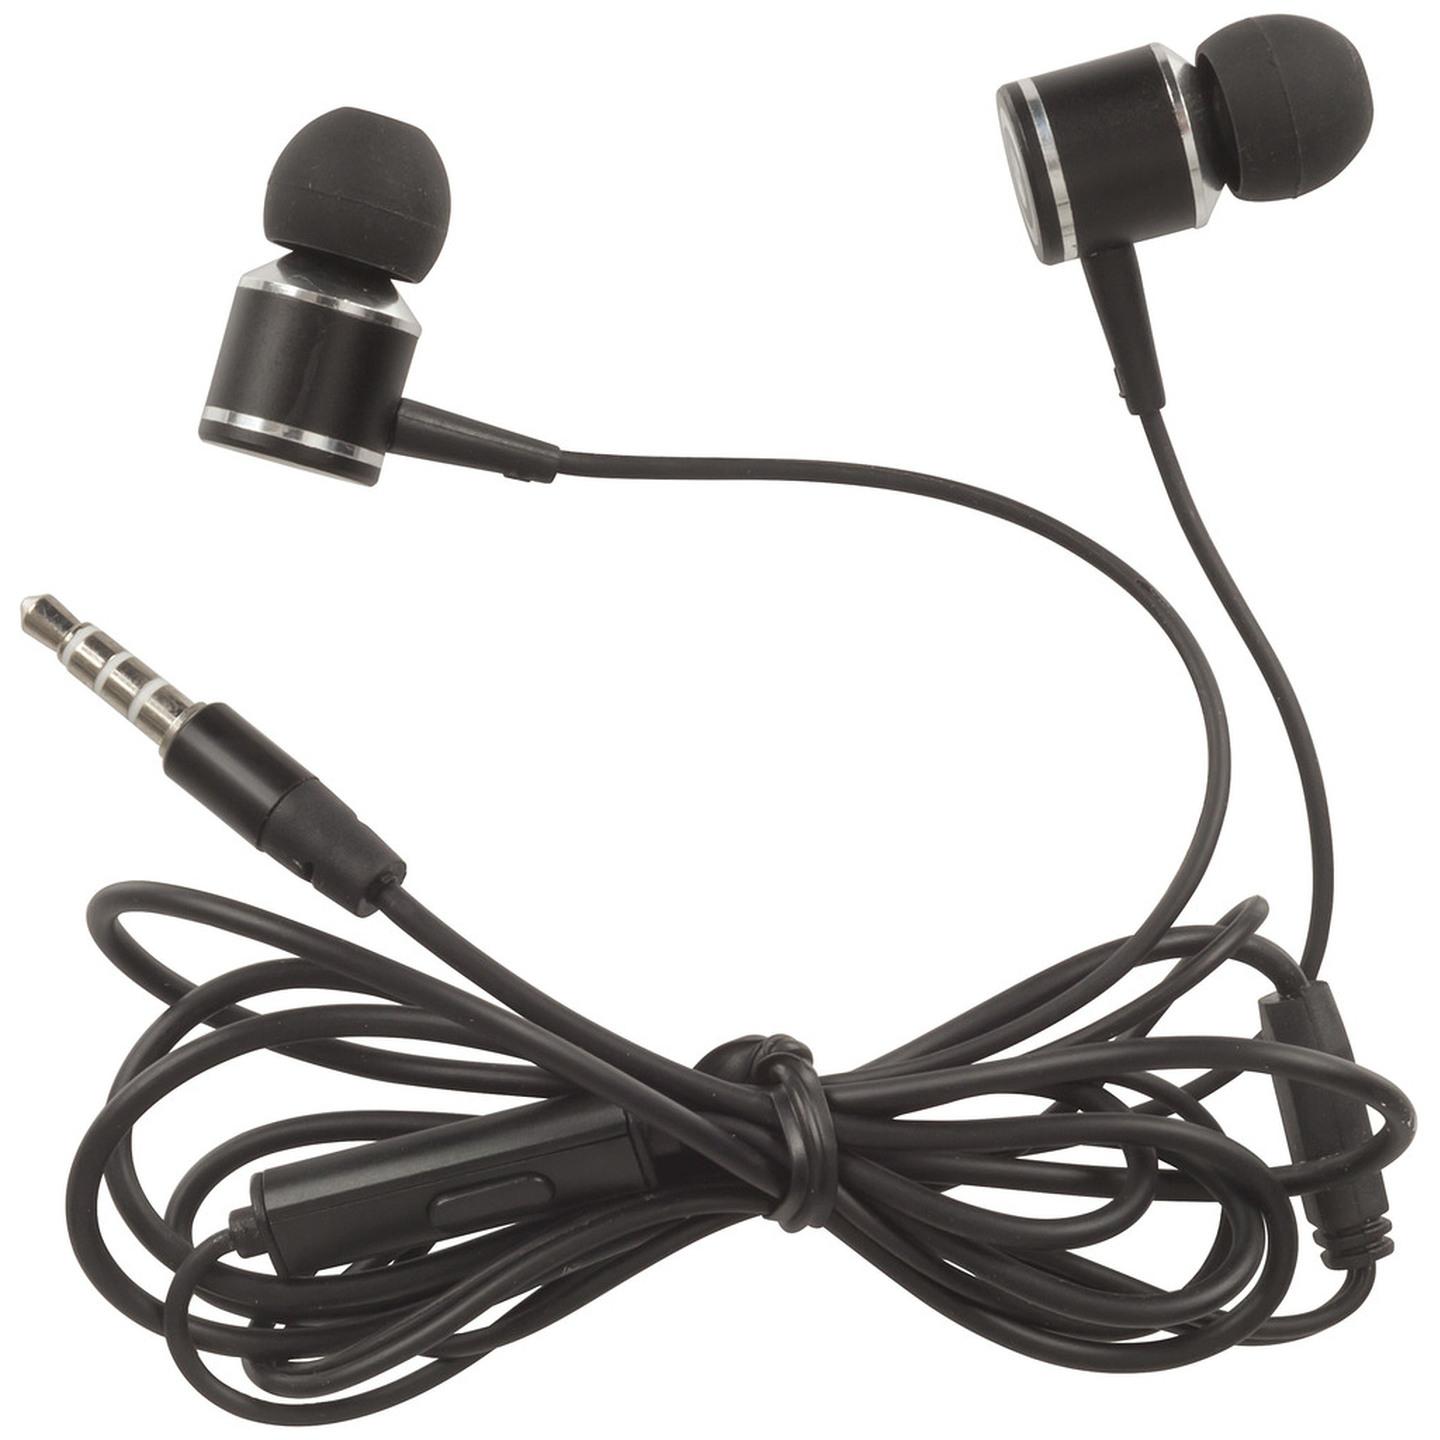 Digitech Aluminium Stereo Earphones with Microphone and Volume Control